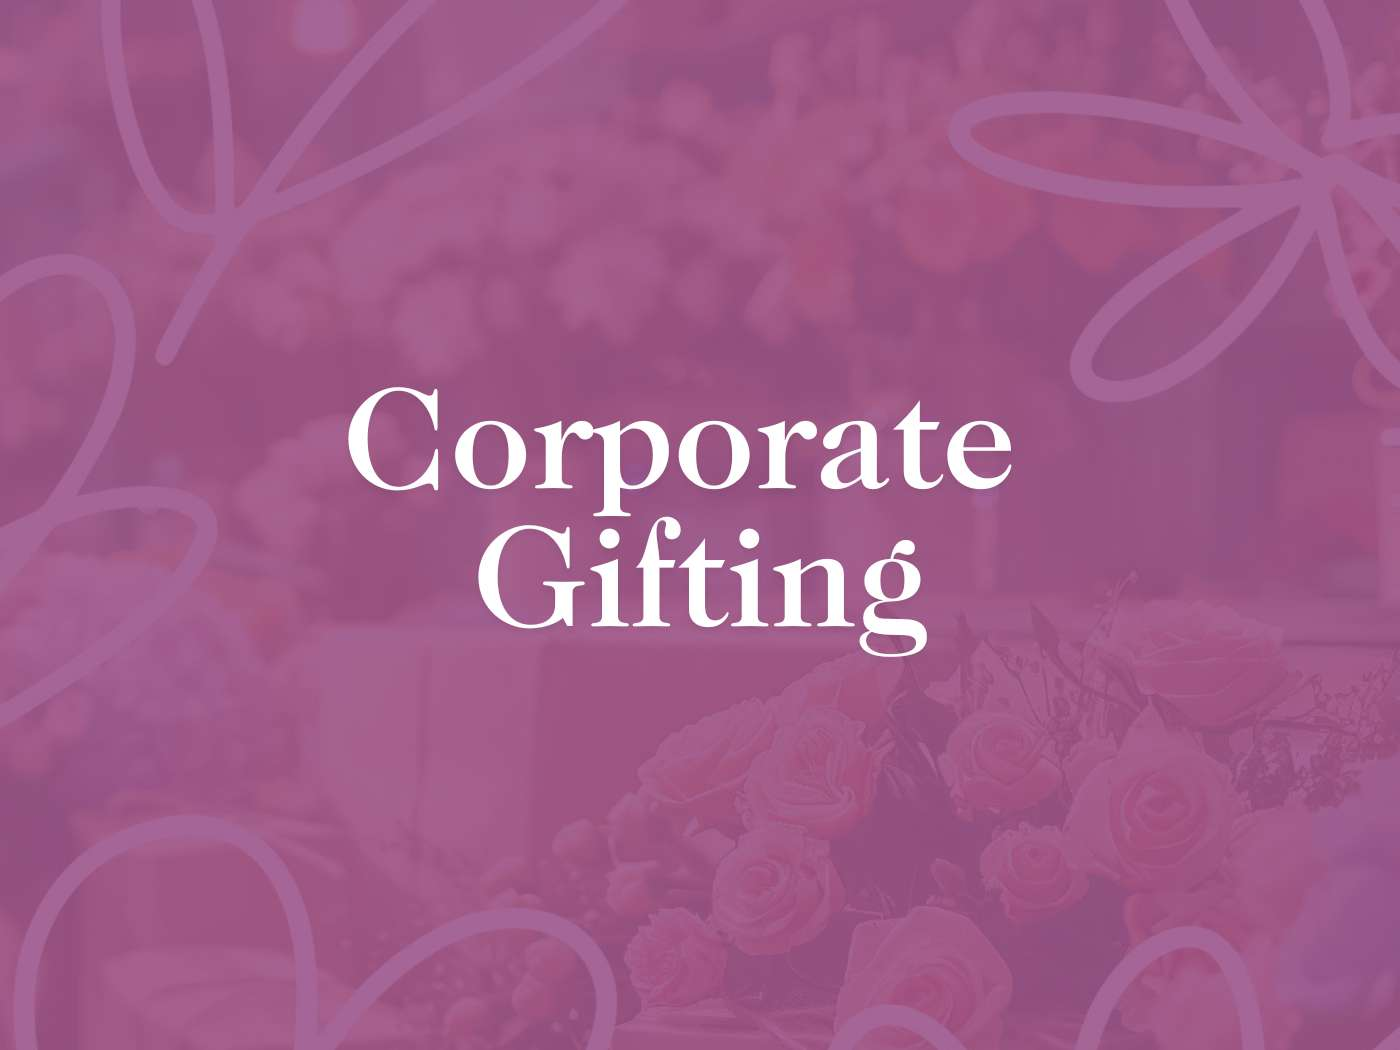 Elegant 'Corporate Gifting' text overlays a sophisticated floral backdrop, part of the Corporate Gifting Collection by Fabulous Flowers and Gifts, curated to enhance professional relationships with finesse.